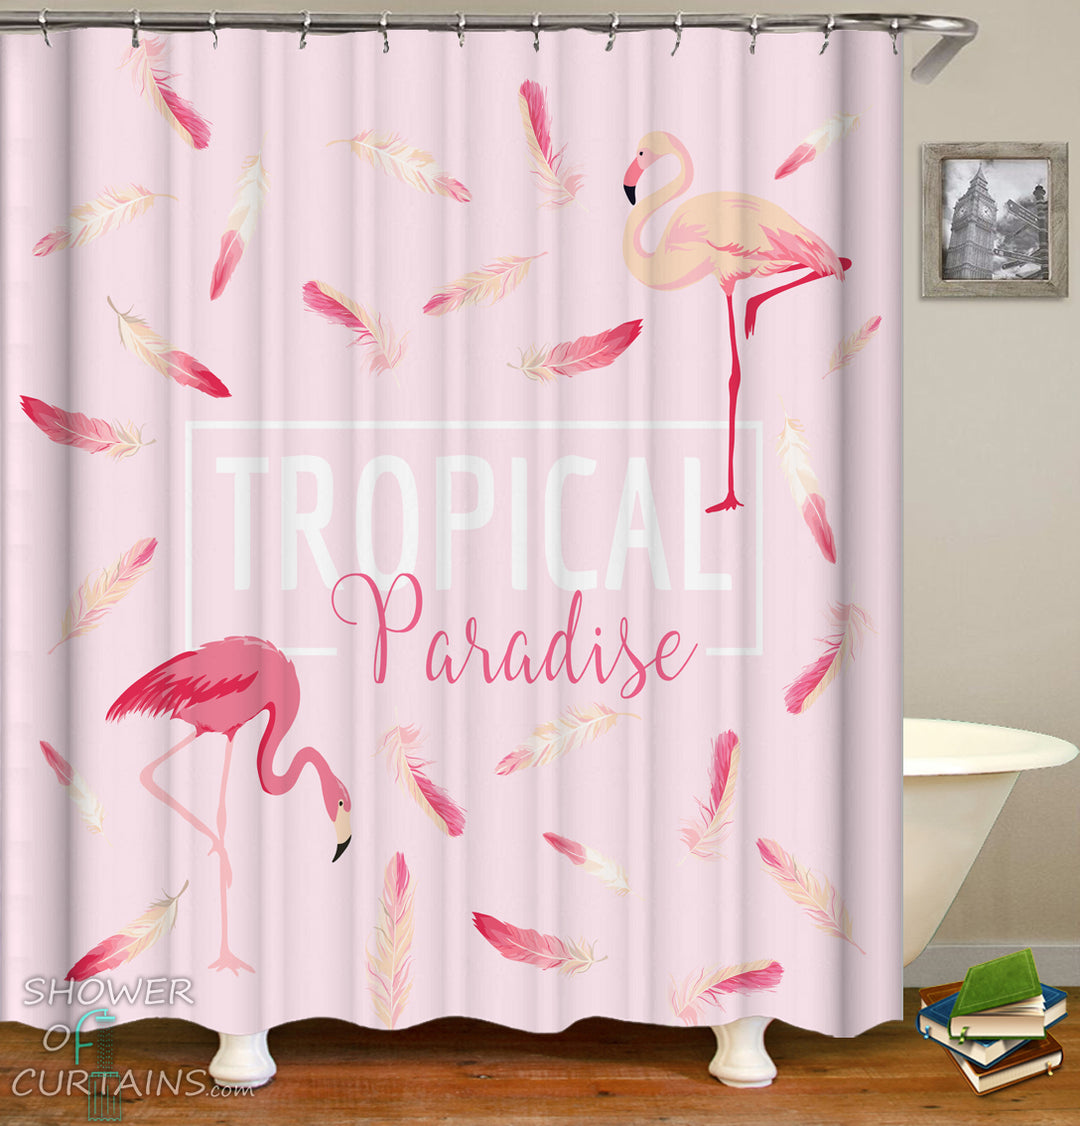 Pink Shower Curtain of Tropical Paradise Flamingo Shower Curtain